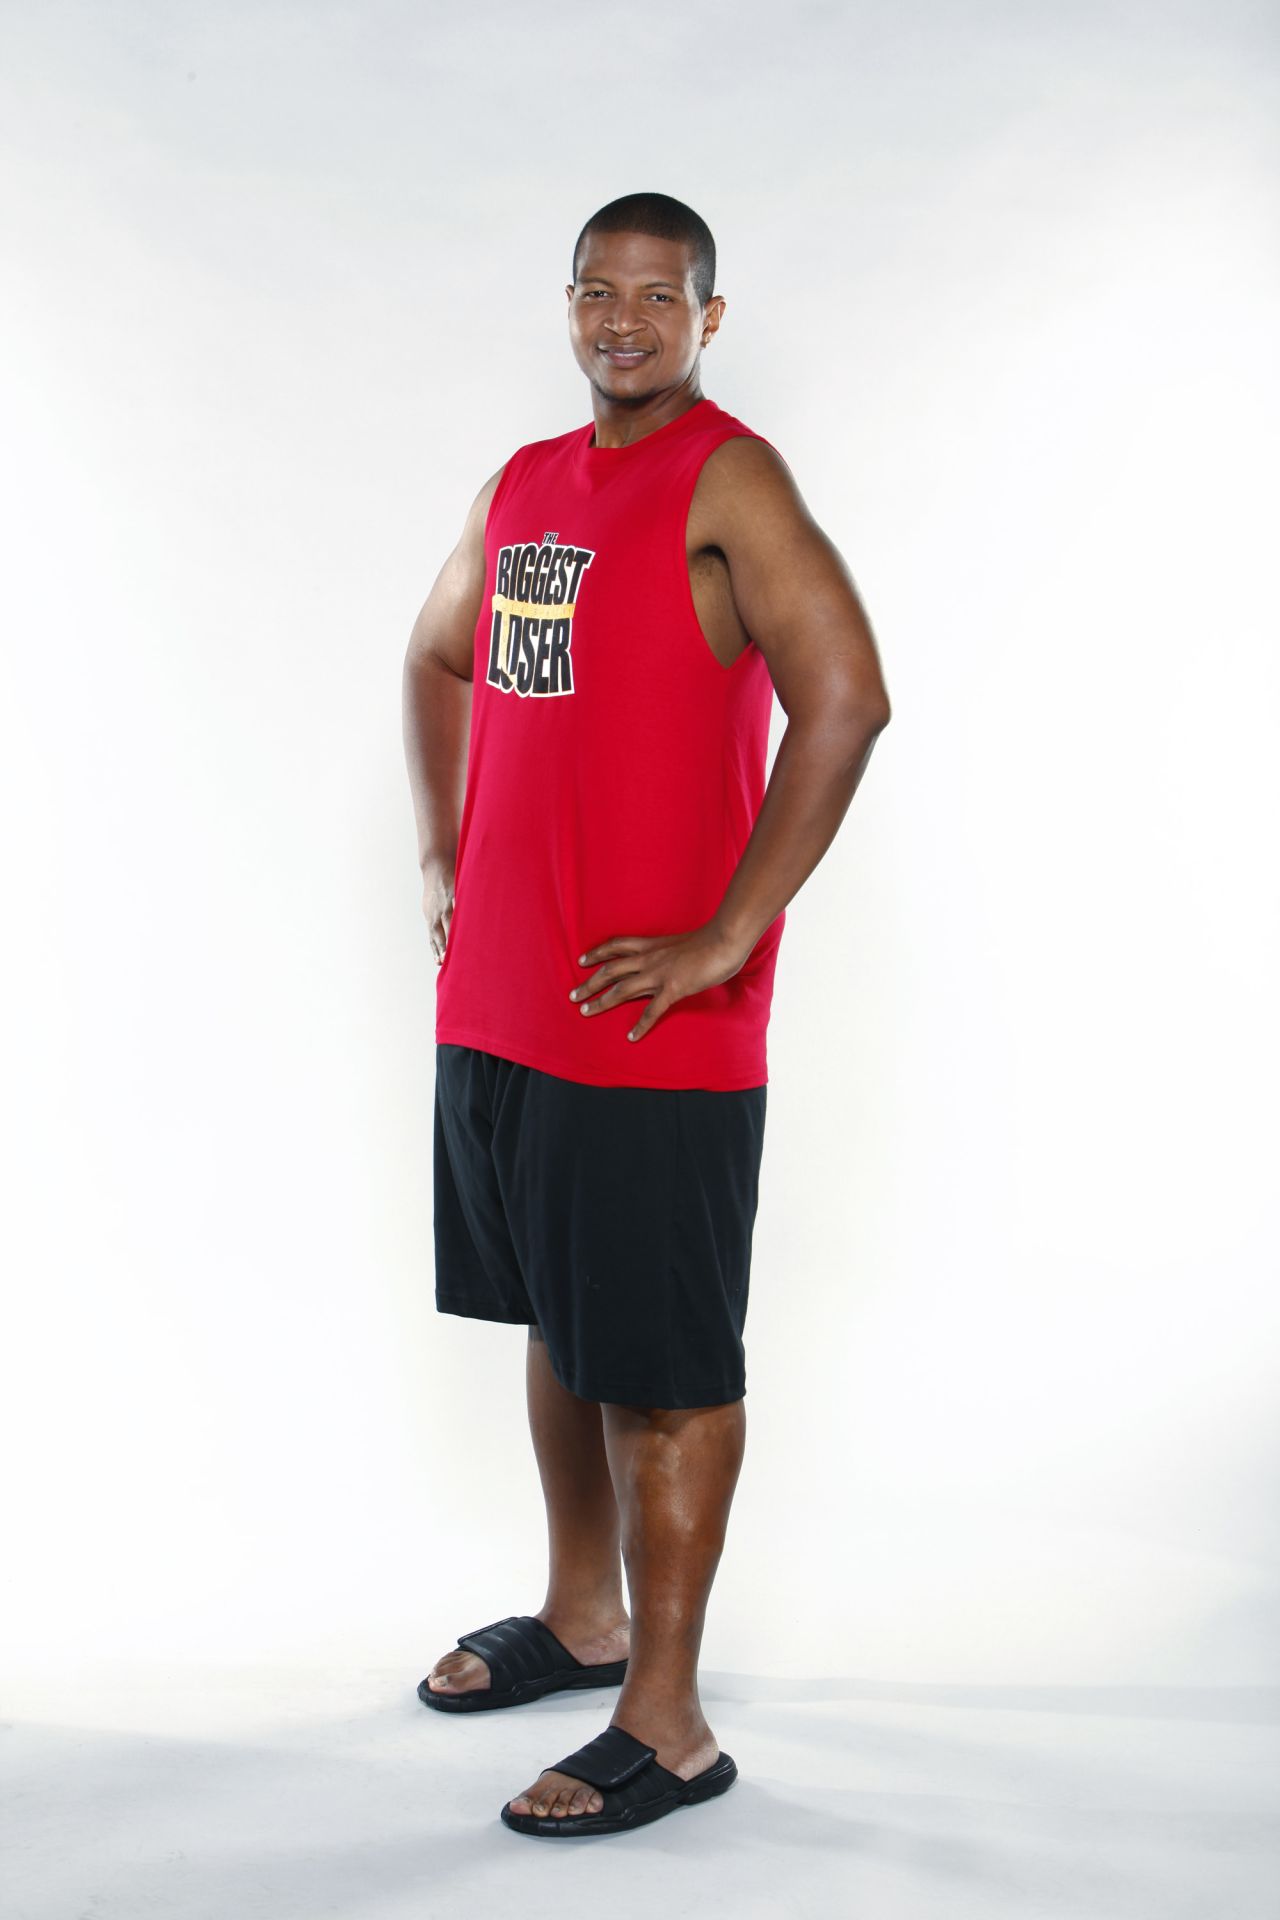 "Biggest Loser" contestant Damien Gurganious died on November 24 from an inoperable brain bleed caused by the sudden onset of a rare autoimmune disorder, idiopathic thrombocytopenic purpura (ITP), his wife Nicole Gurganious said in a public Facebook post. Gurganious was 38. 